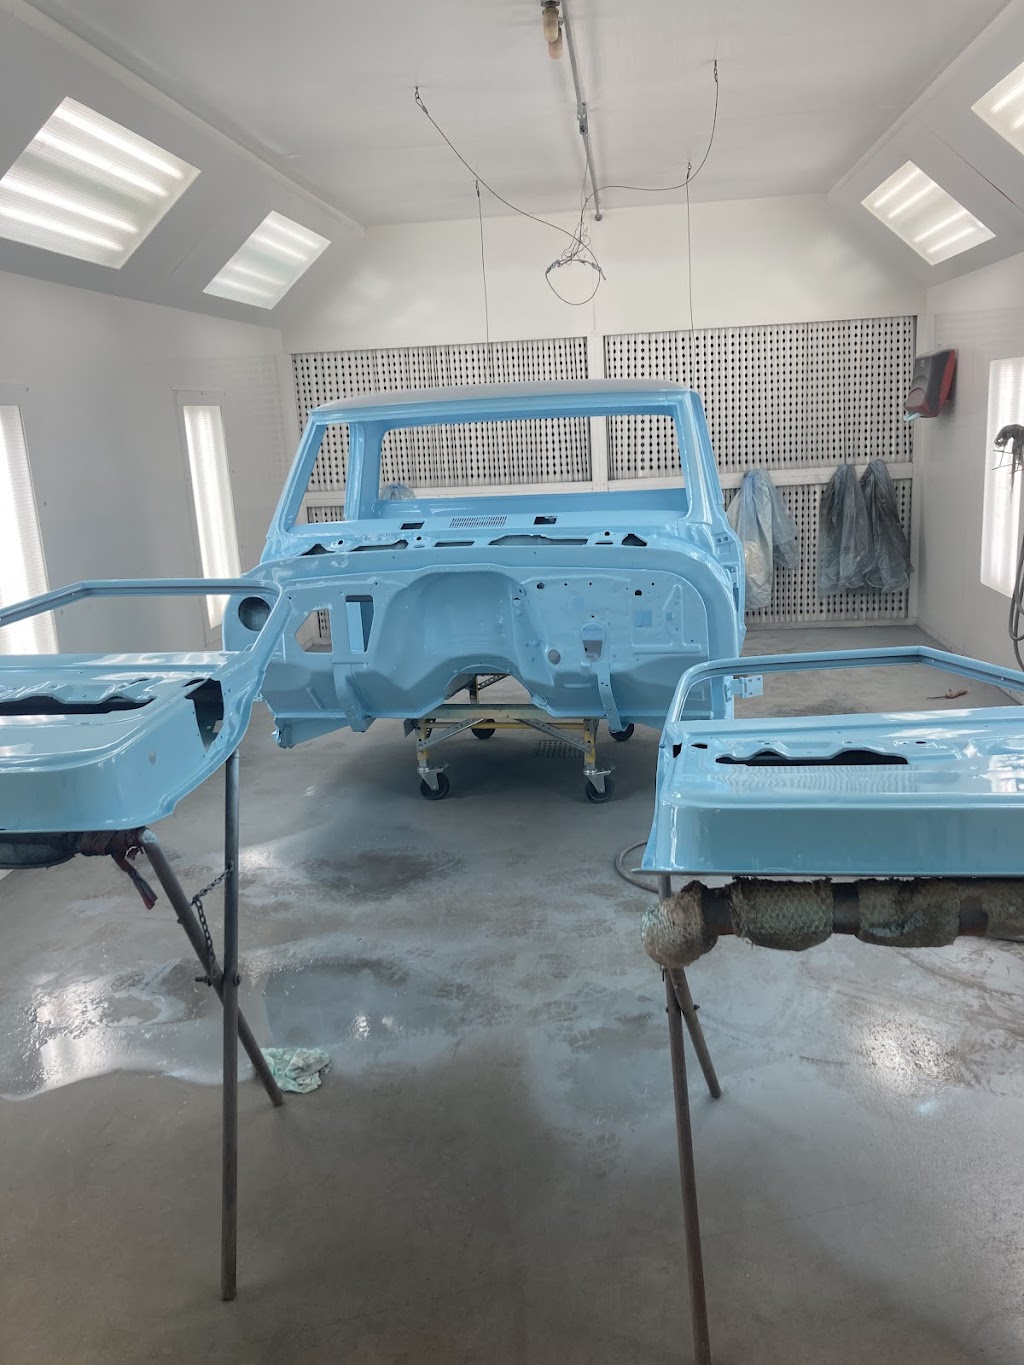 armstrong auto refinish | box 867, 124 High St, Burks Falls, ON P0A 1C0, Canada | Phone: (705) 783-6628